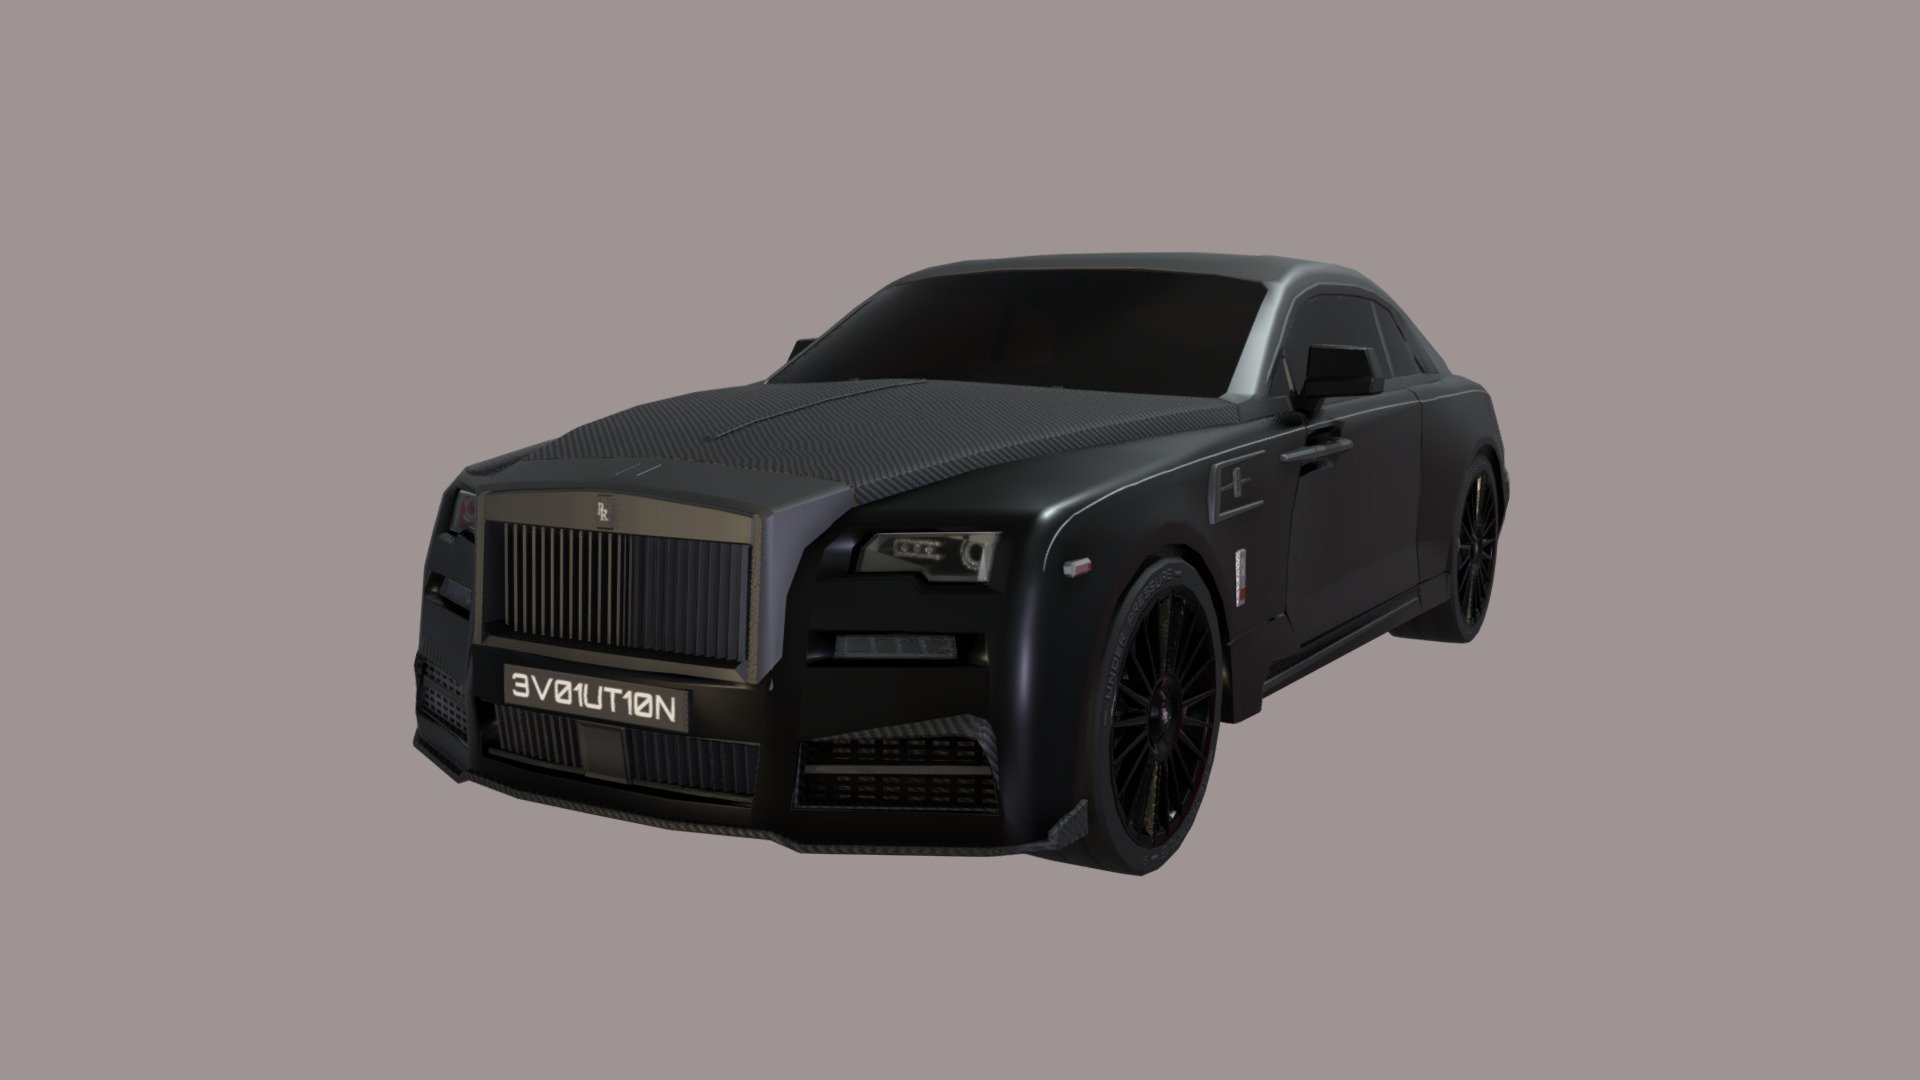 4k Textures, Substance Painter File included. Lowpoly.

The only Rolls Royce you'll ever be able to afford.
Possibly the most Based Vehicle to ever grace the roads. 

Check out the real thing, model is not 100% accurate.

https://www.youtube.com/watch?v=fU5eKGNCT30

*Note: Tires are mirror'd - Rolls-Royce 2020 Mansory Wraith - Buy Royalty Free 3D model by BasedOptimal 3d model